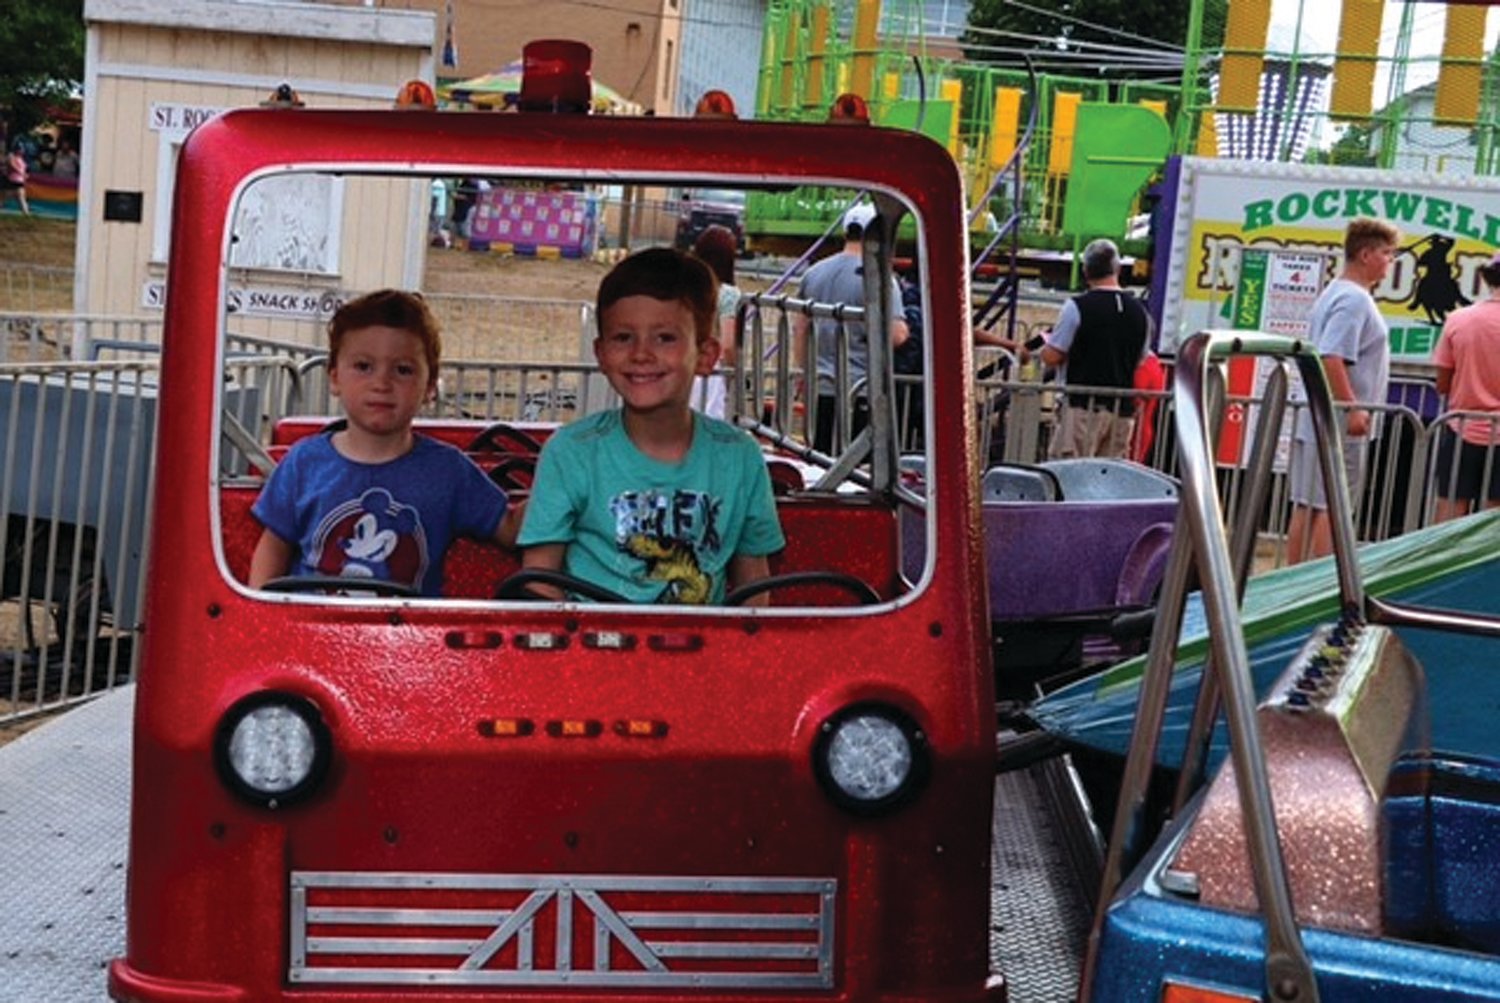 RIDING TOGETHER: Julian and Oliver Matos of Warwick, grandsons of St. Rocco Holy Name Society member, James Lanzi, enjoyed a ride at the feast.